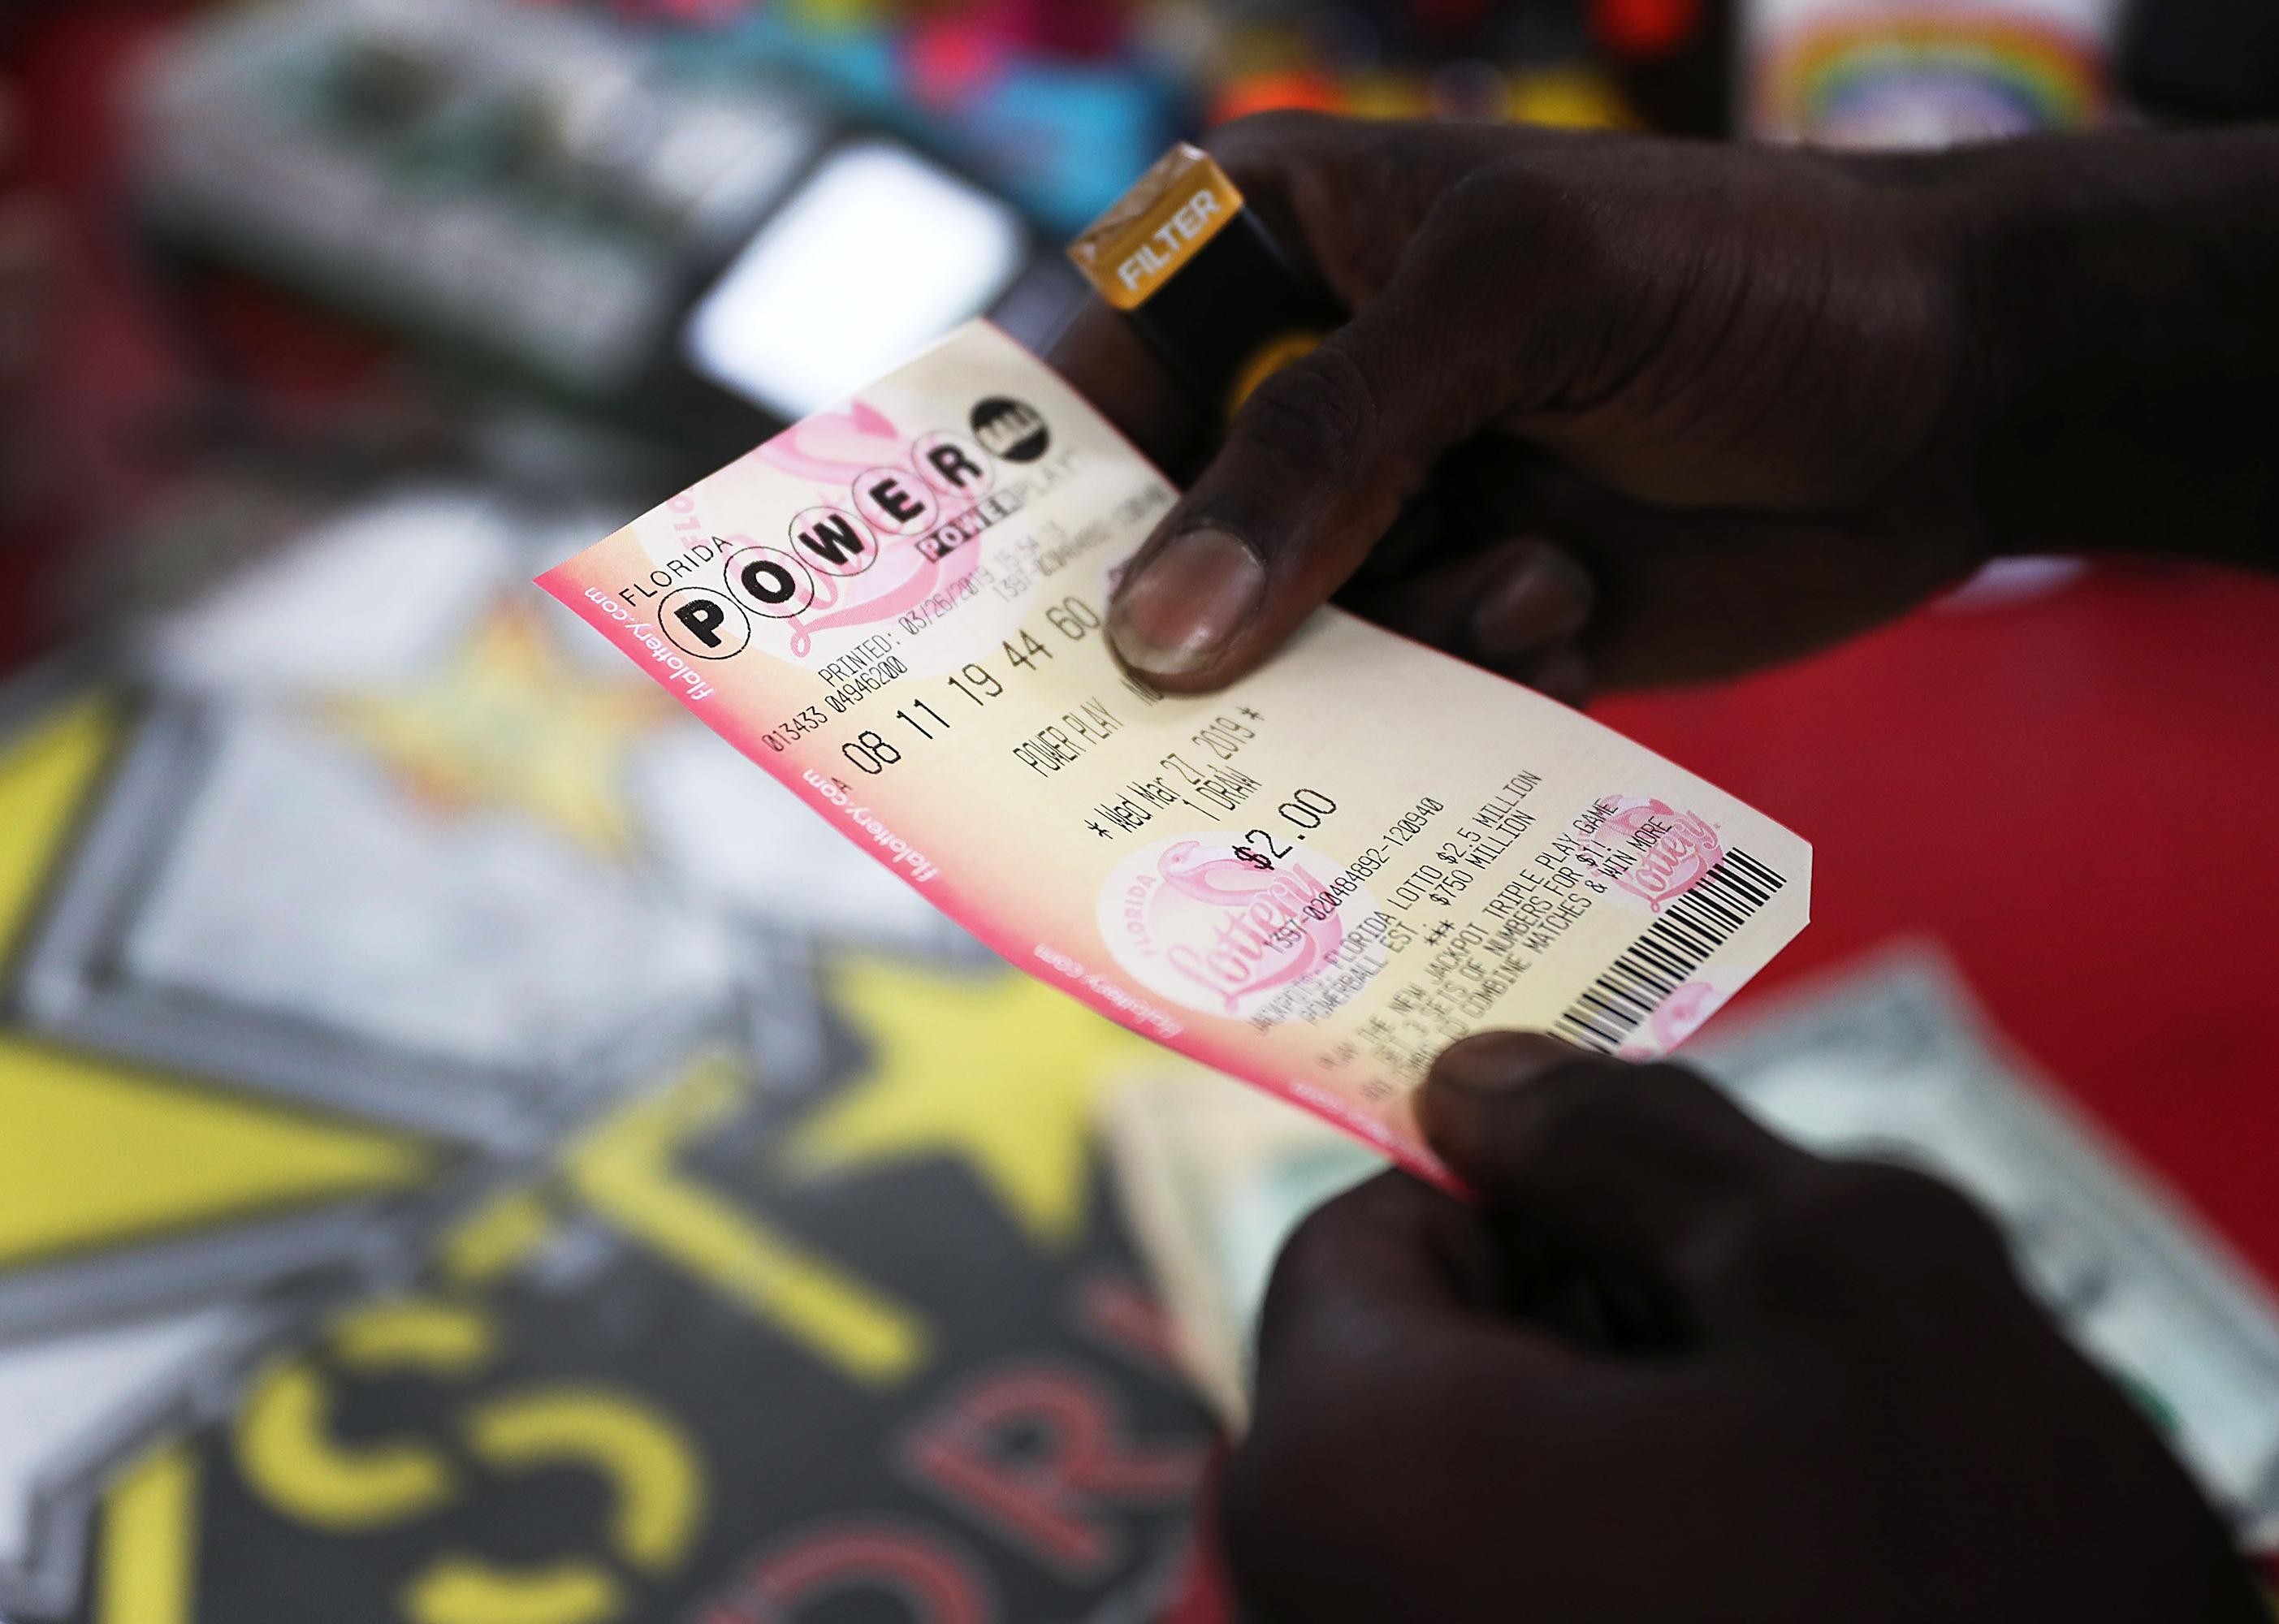 A man buying a powerball lottery ticket.